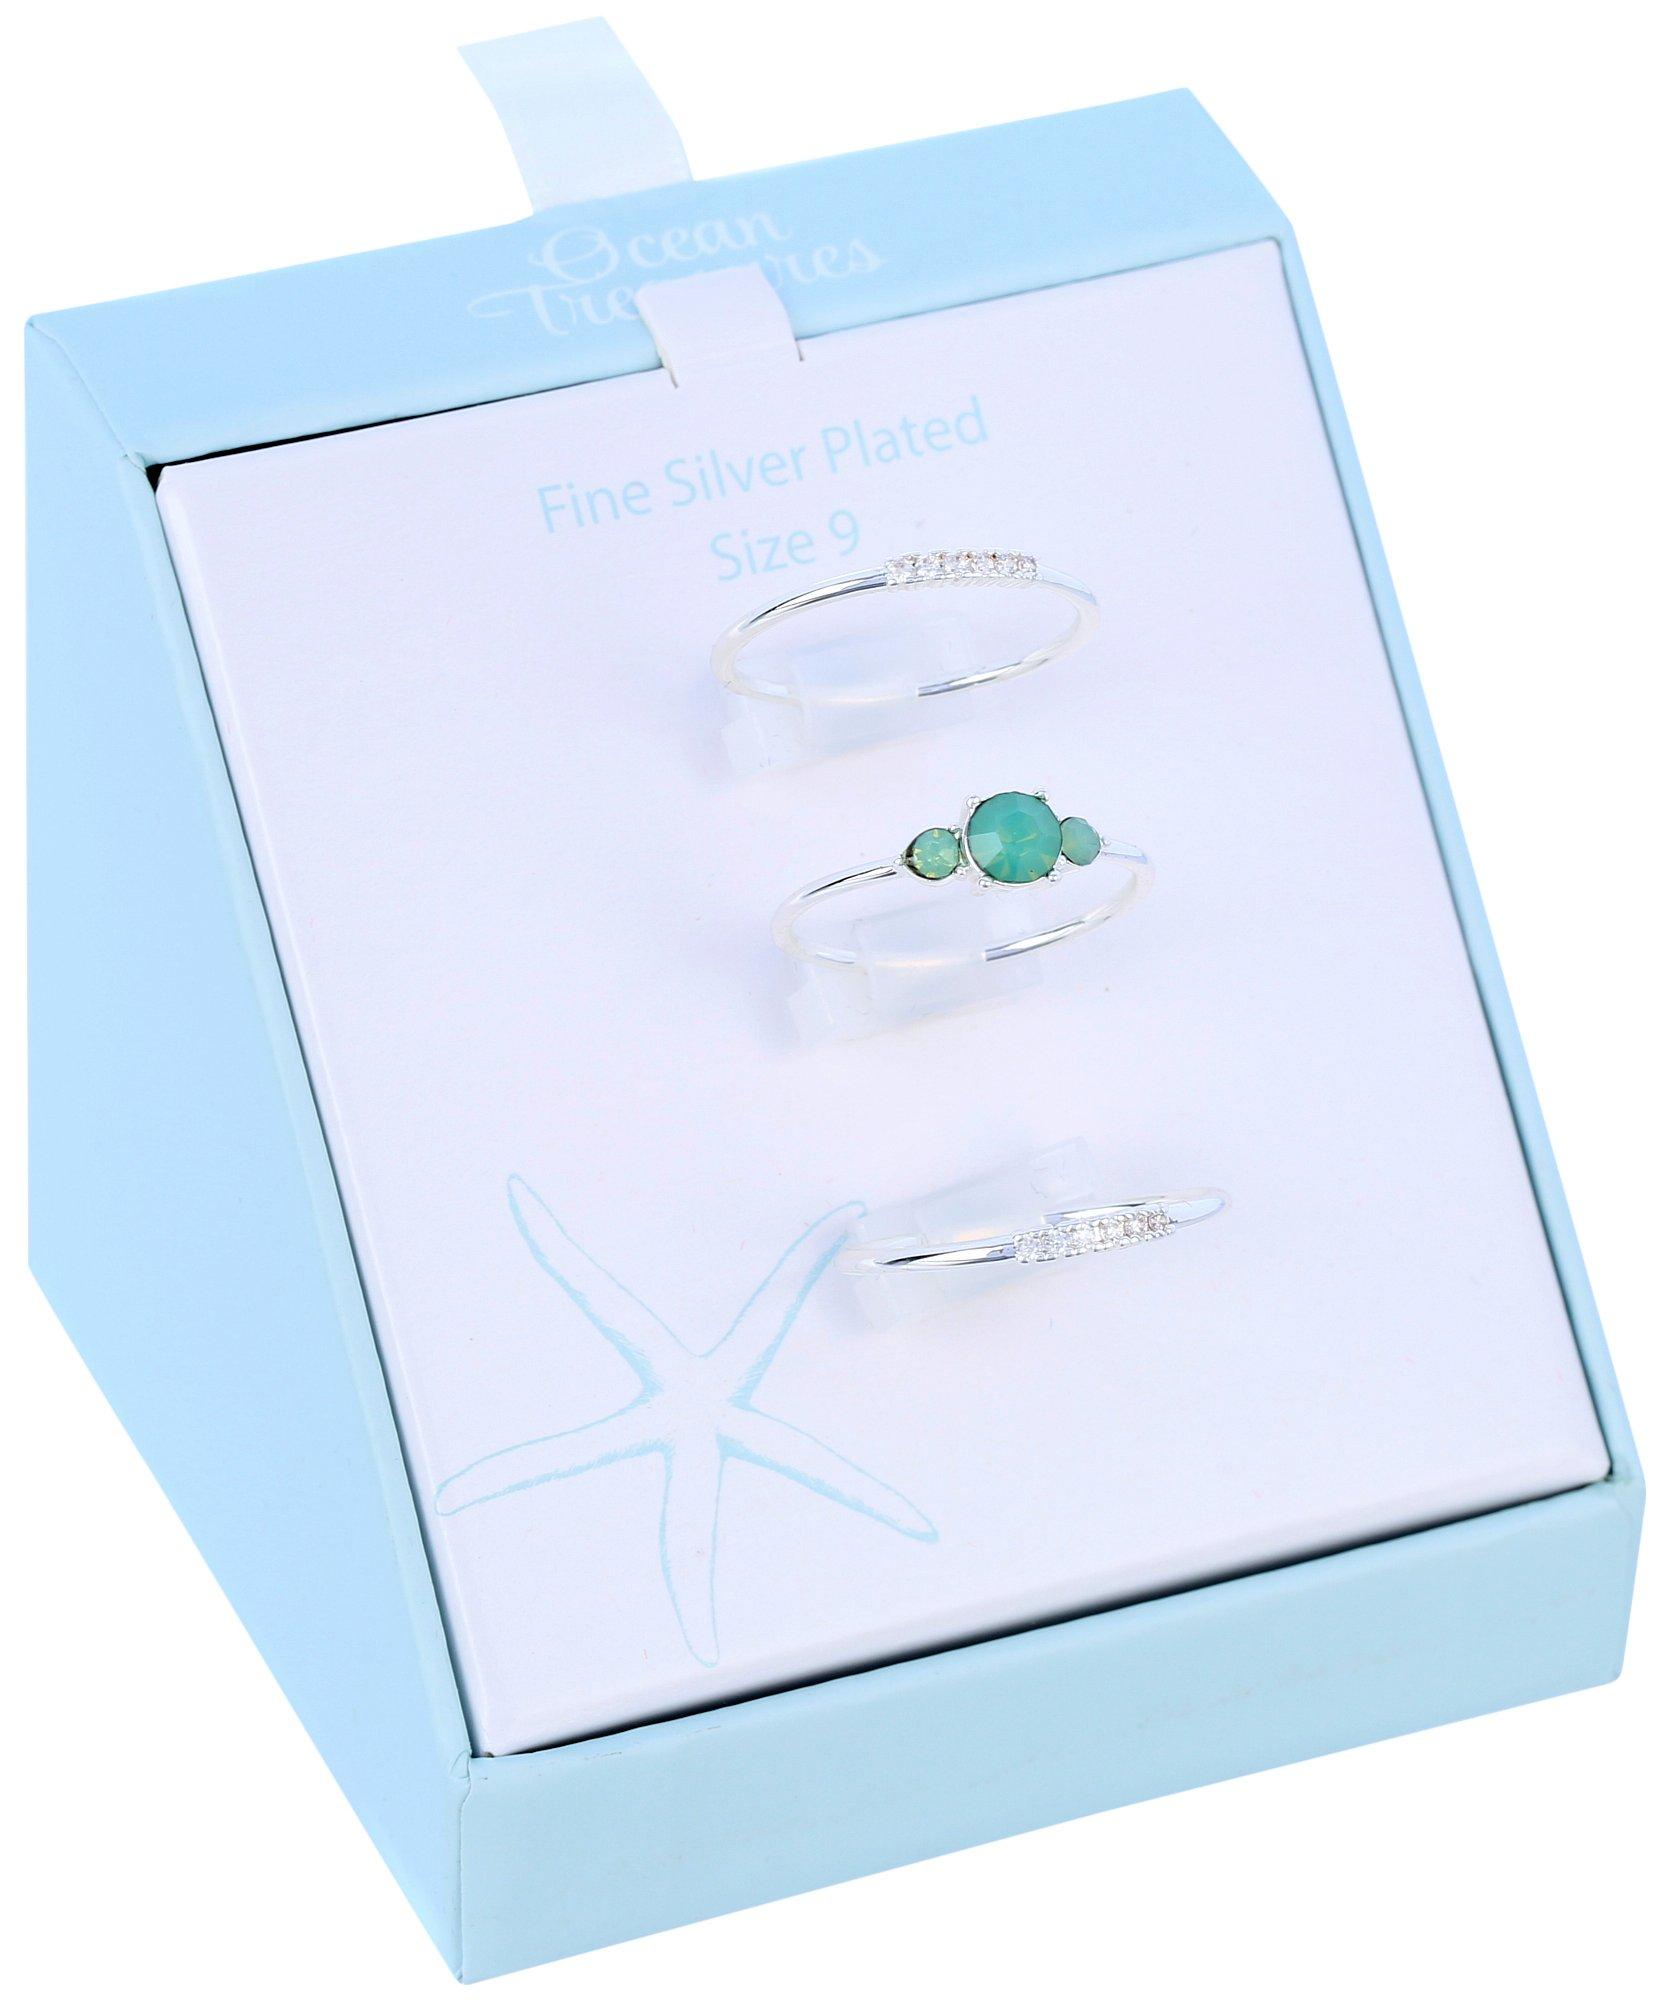 Ocean Treasures 3 Pc. Fine Silver Plated Ring Set